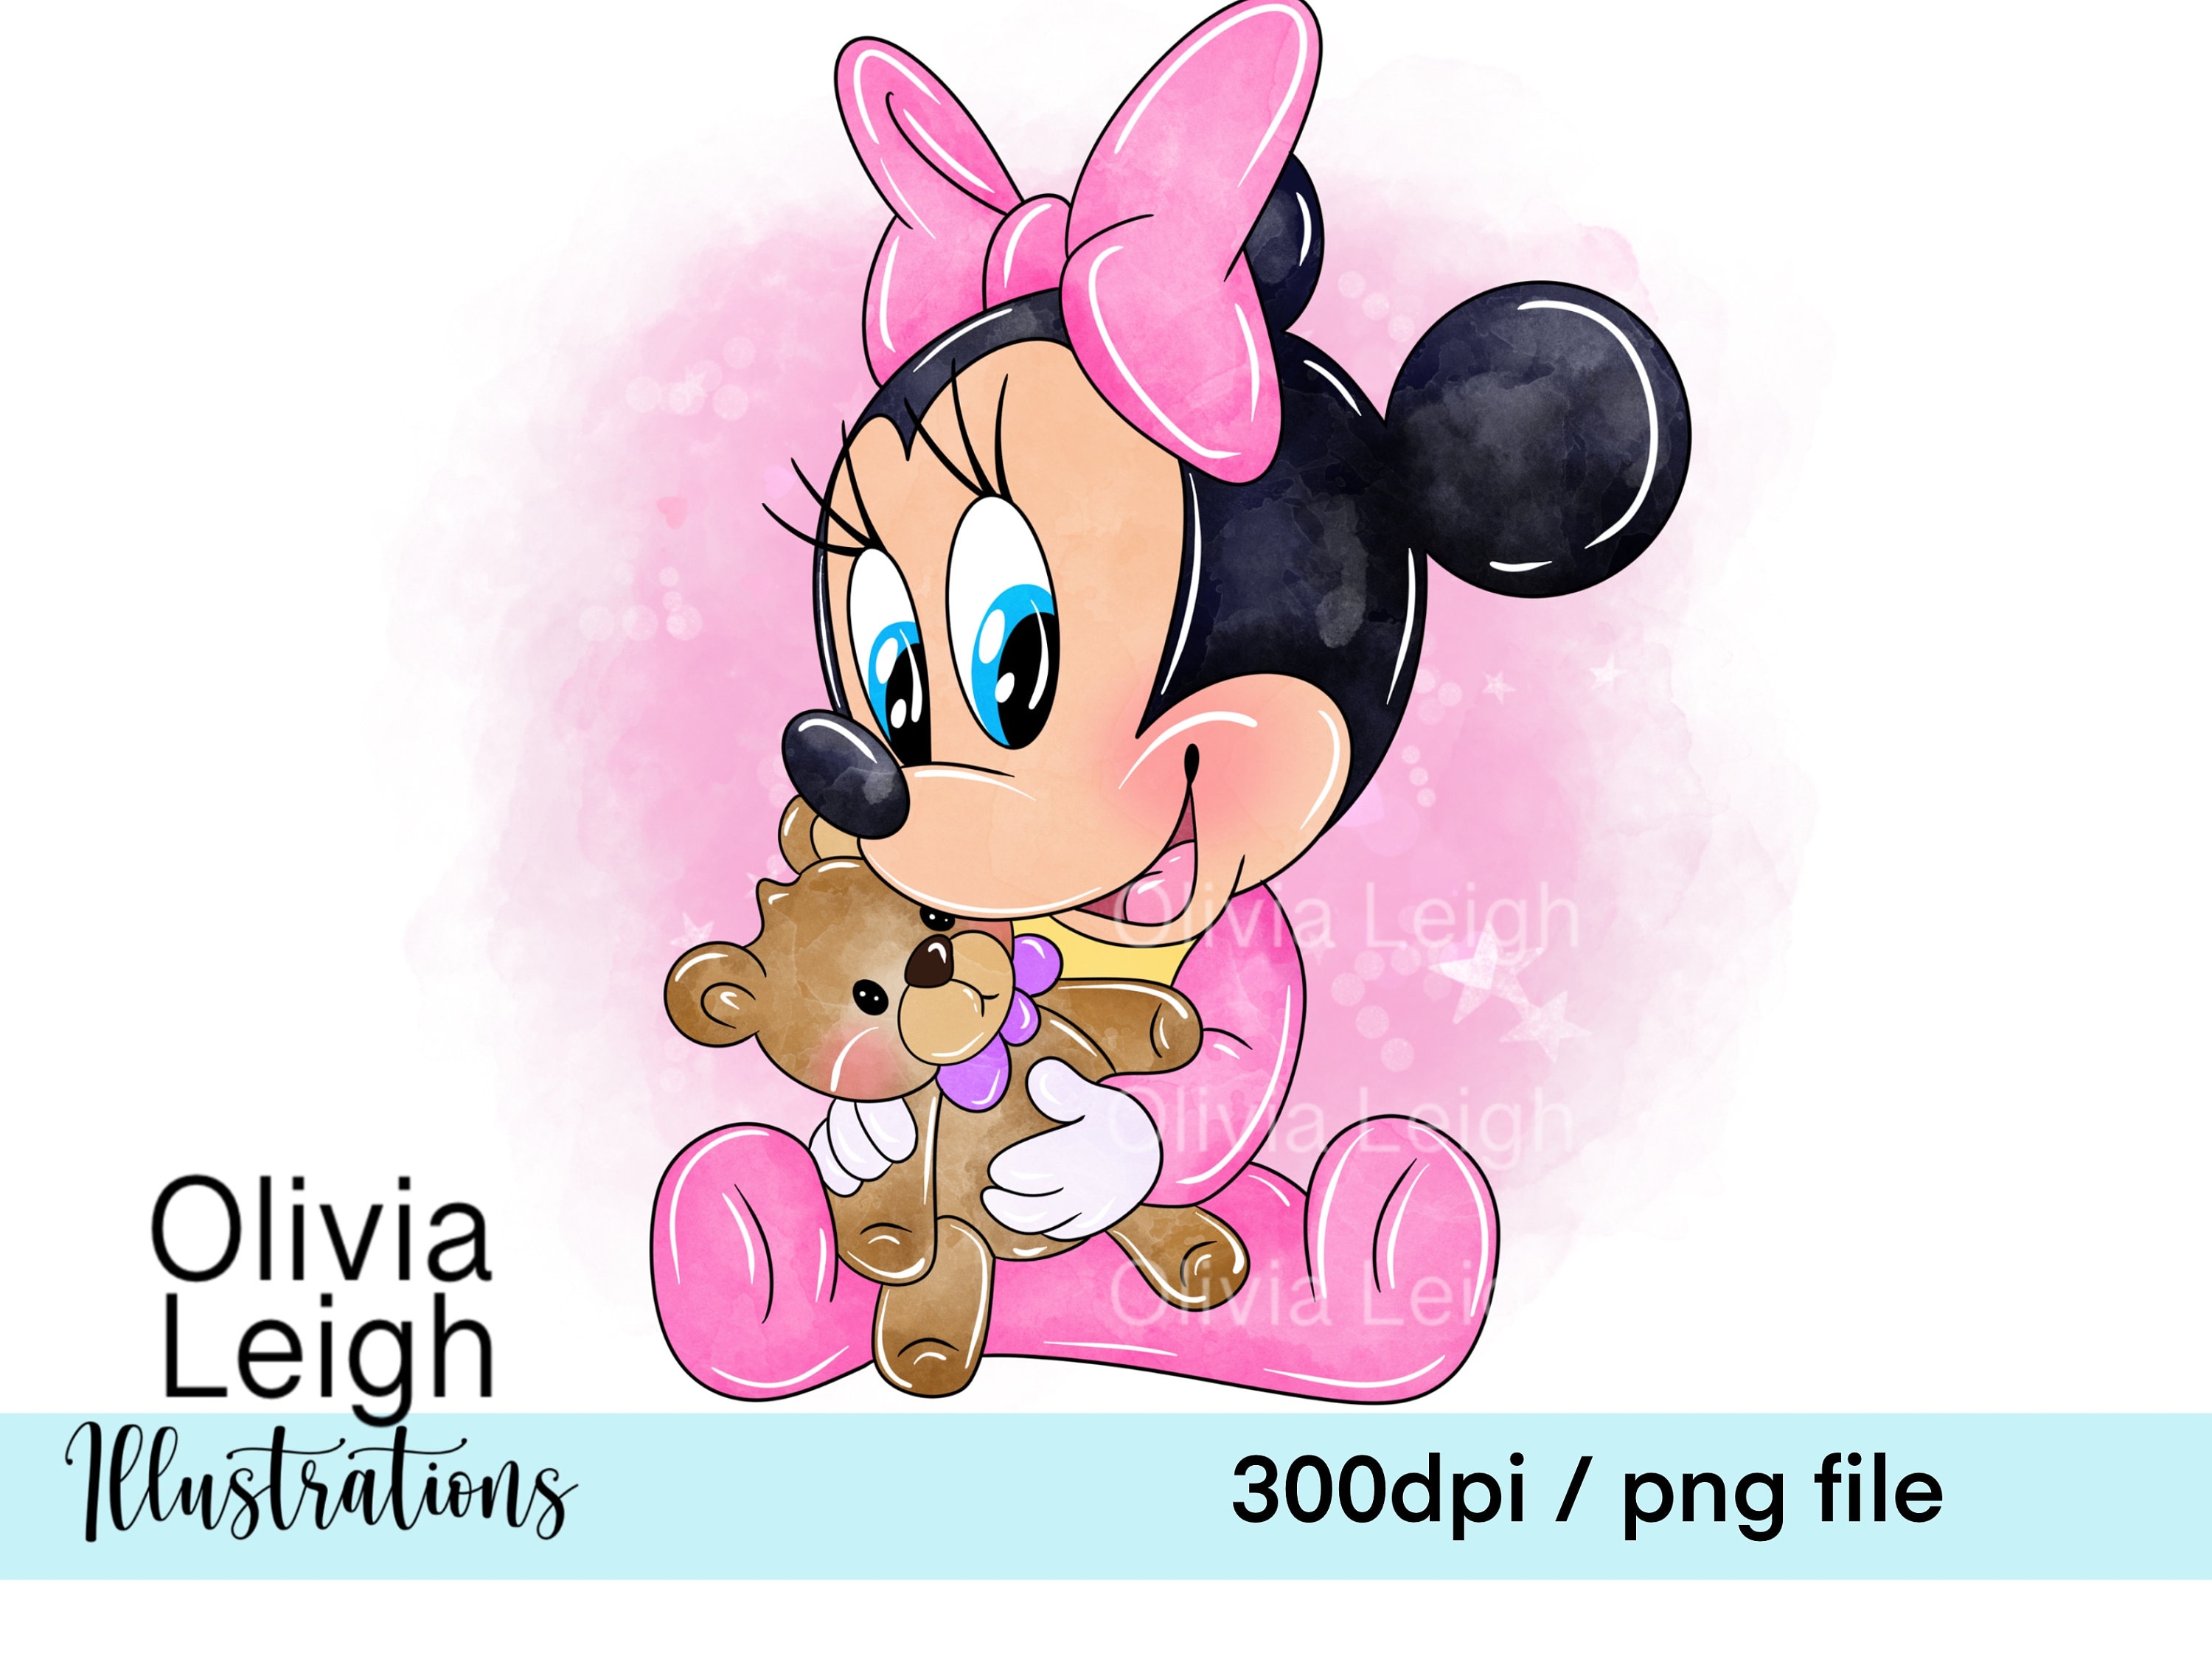 bebes minnie con chupete -  Baby minnie mouse, Minnie mouse images, Baby  minnie